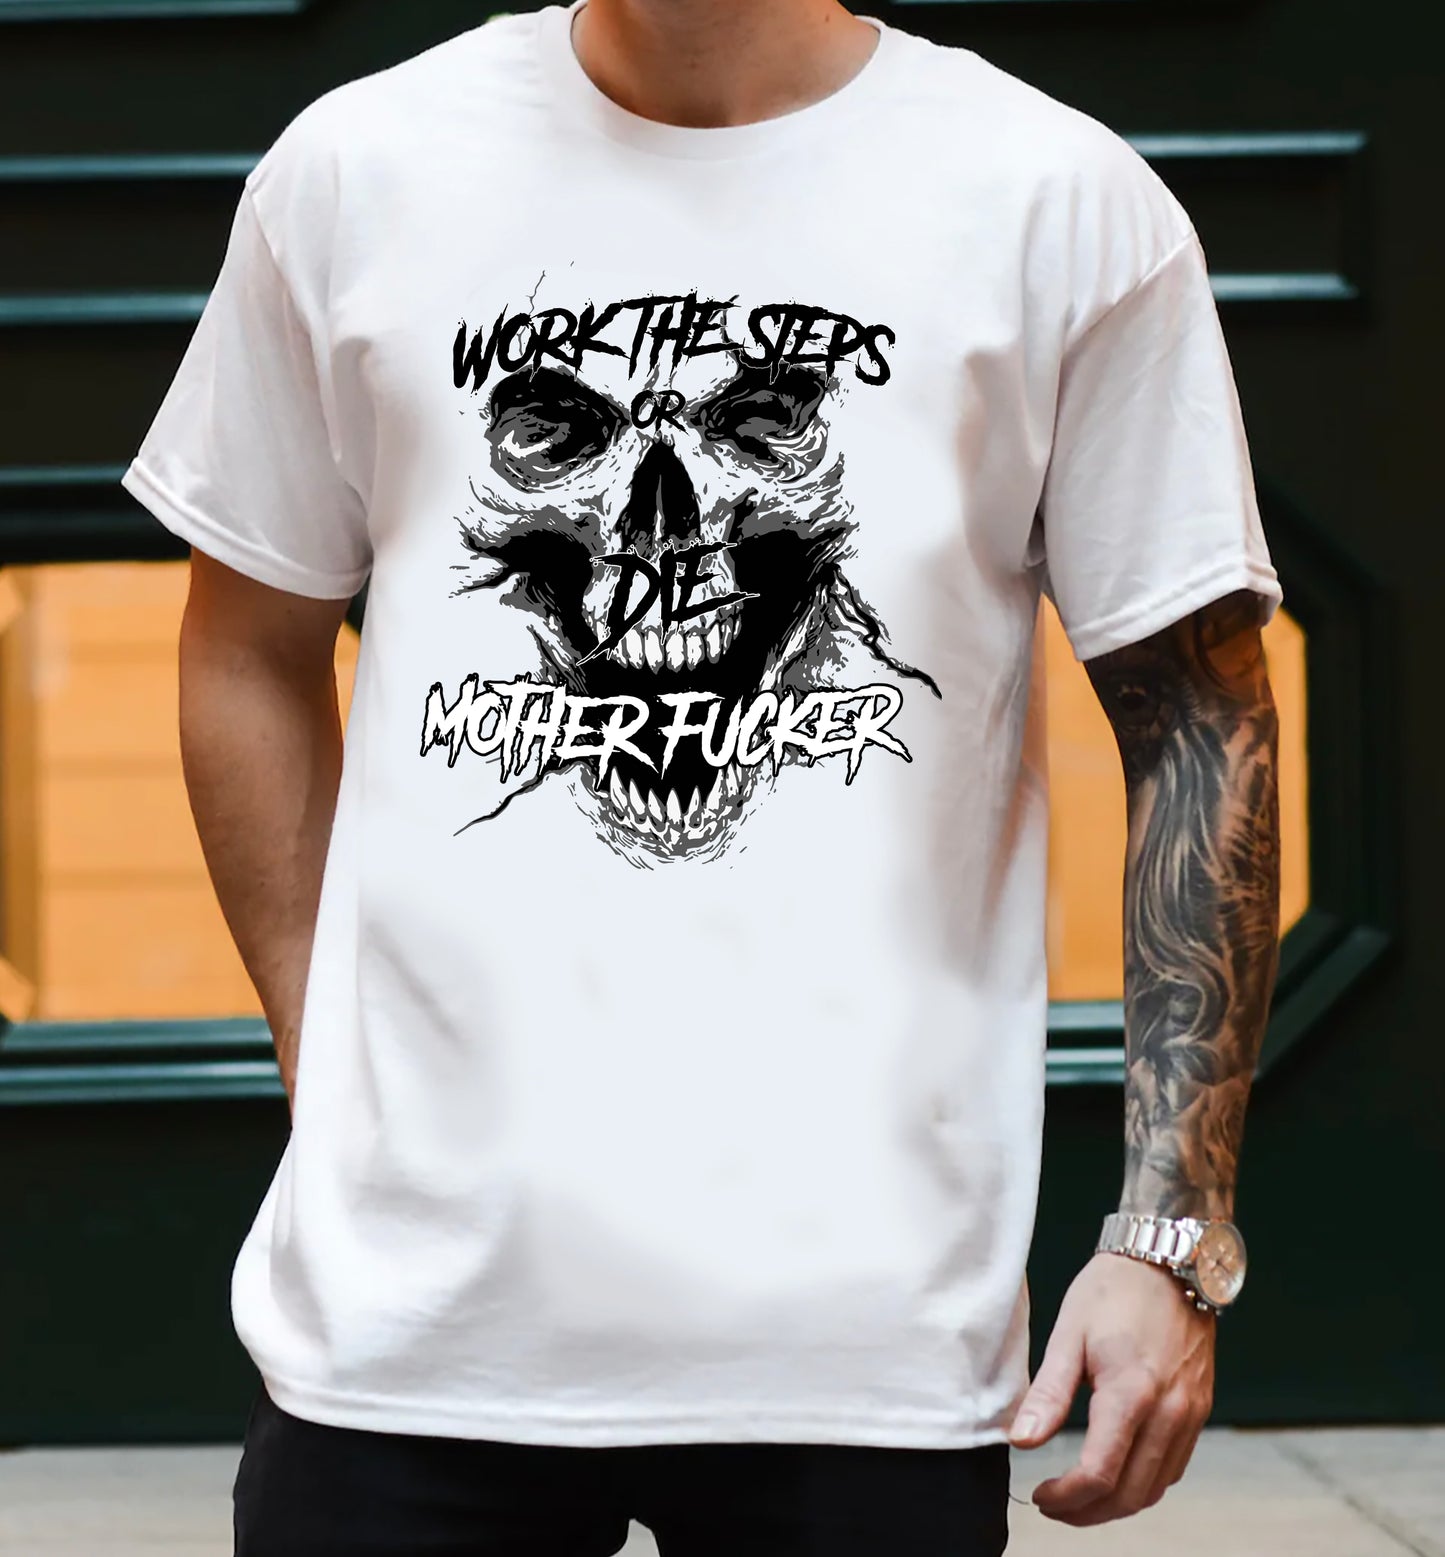 man with tattoo standing in front of a green wall wearing a white tee shirt with a black screaming skeleton skull face with text on top that says "WORK THE STEPS OR DIE MOTHERFUCKER"